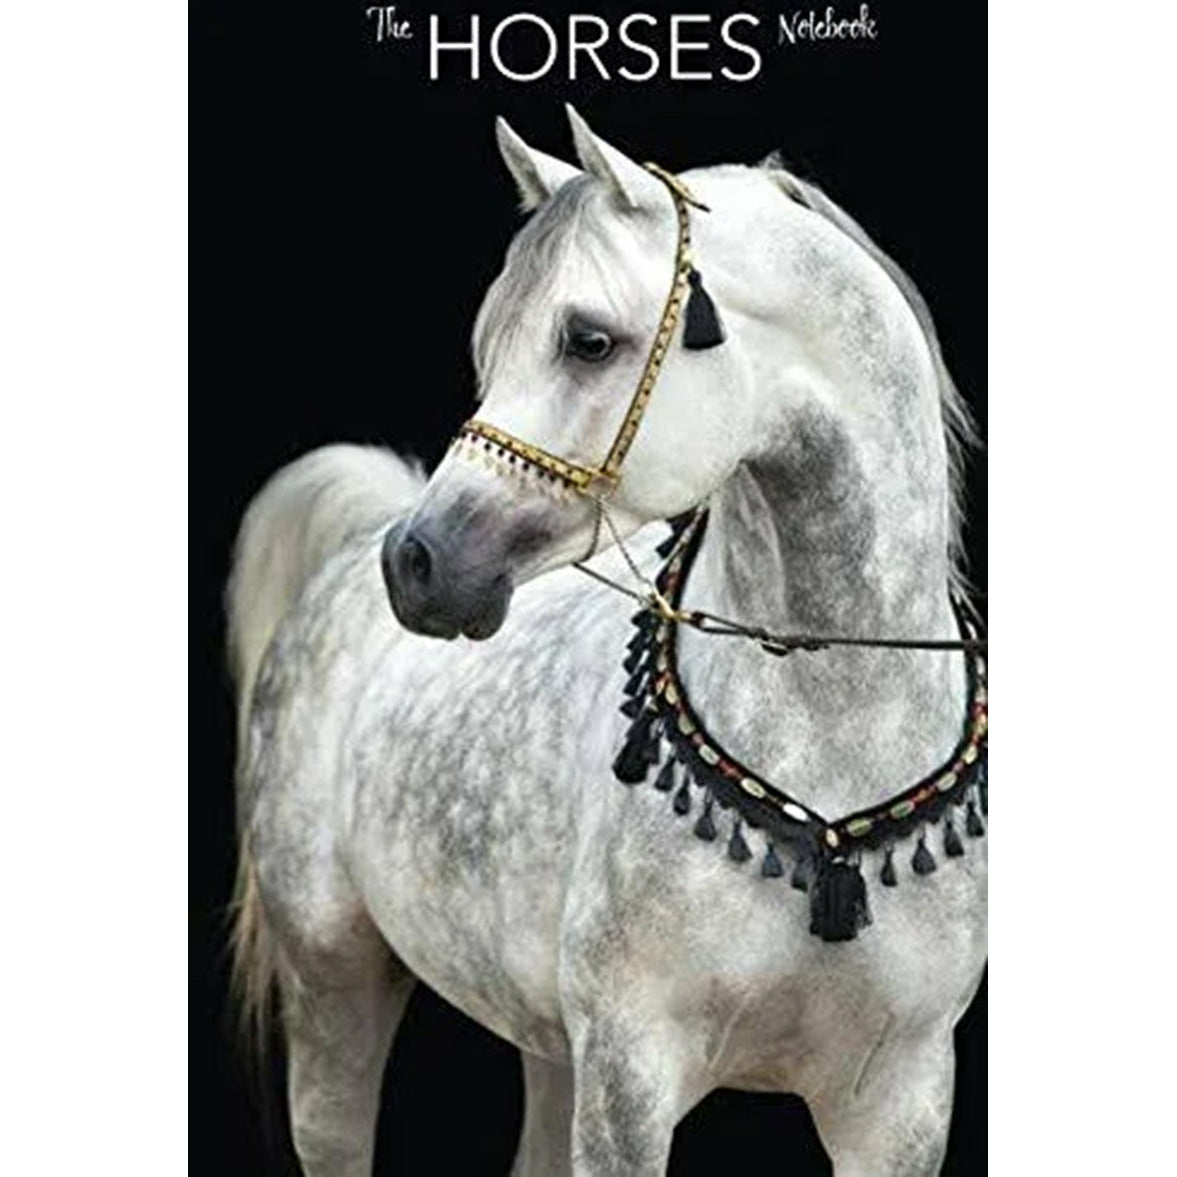 The Horses Notebook